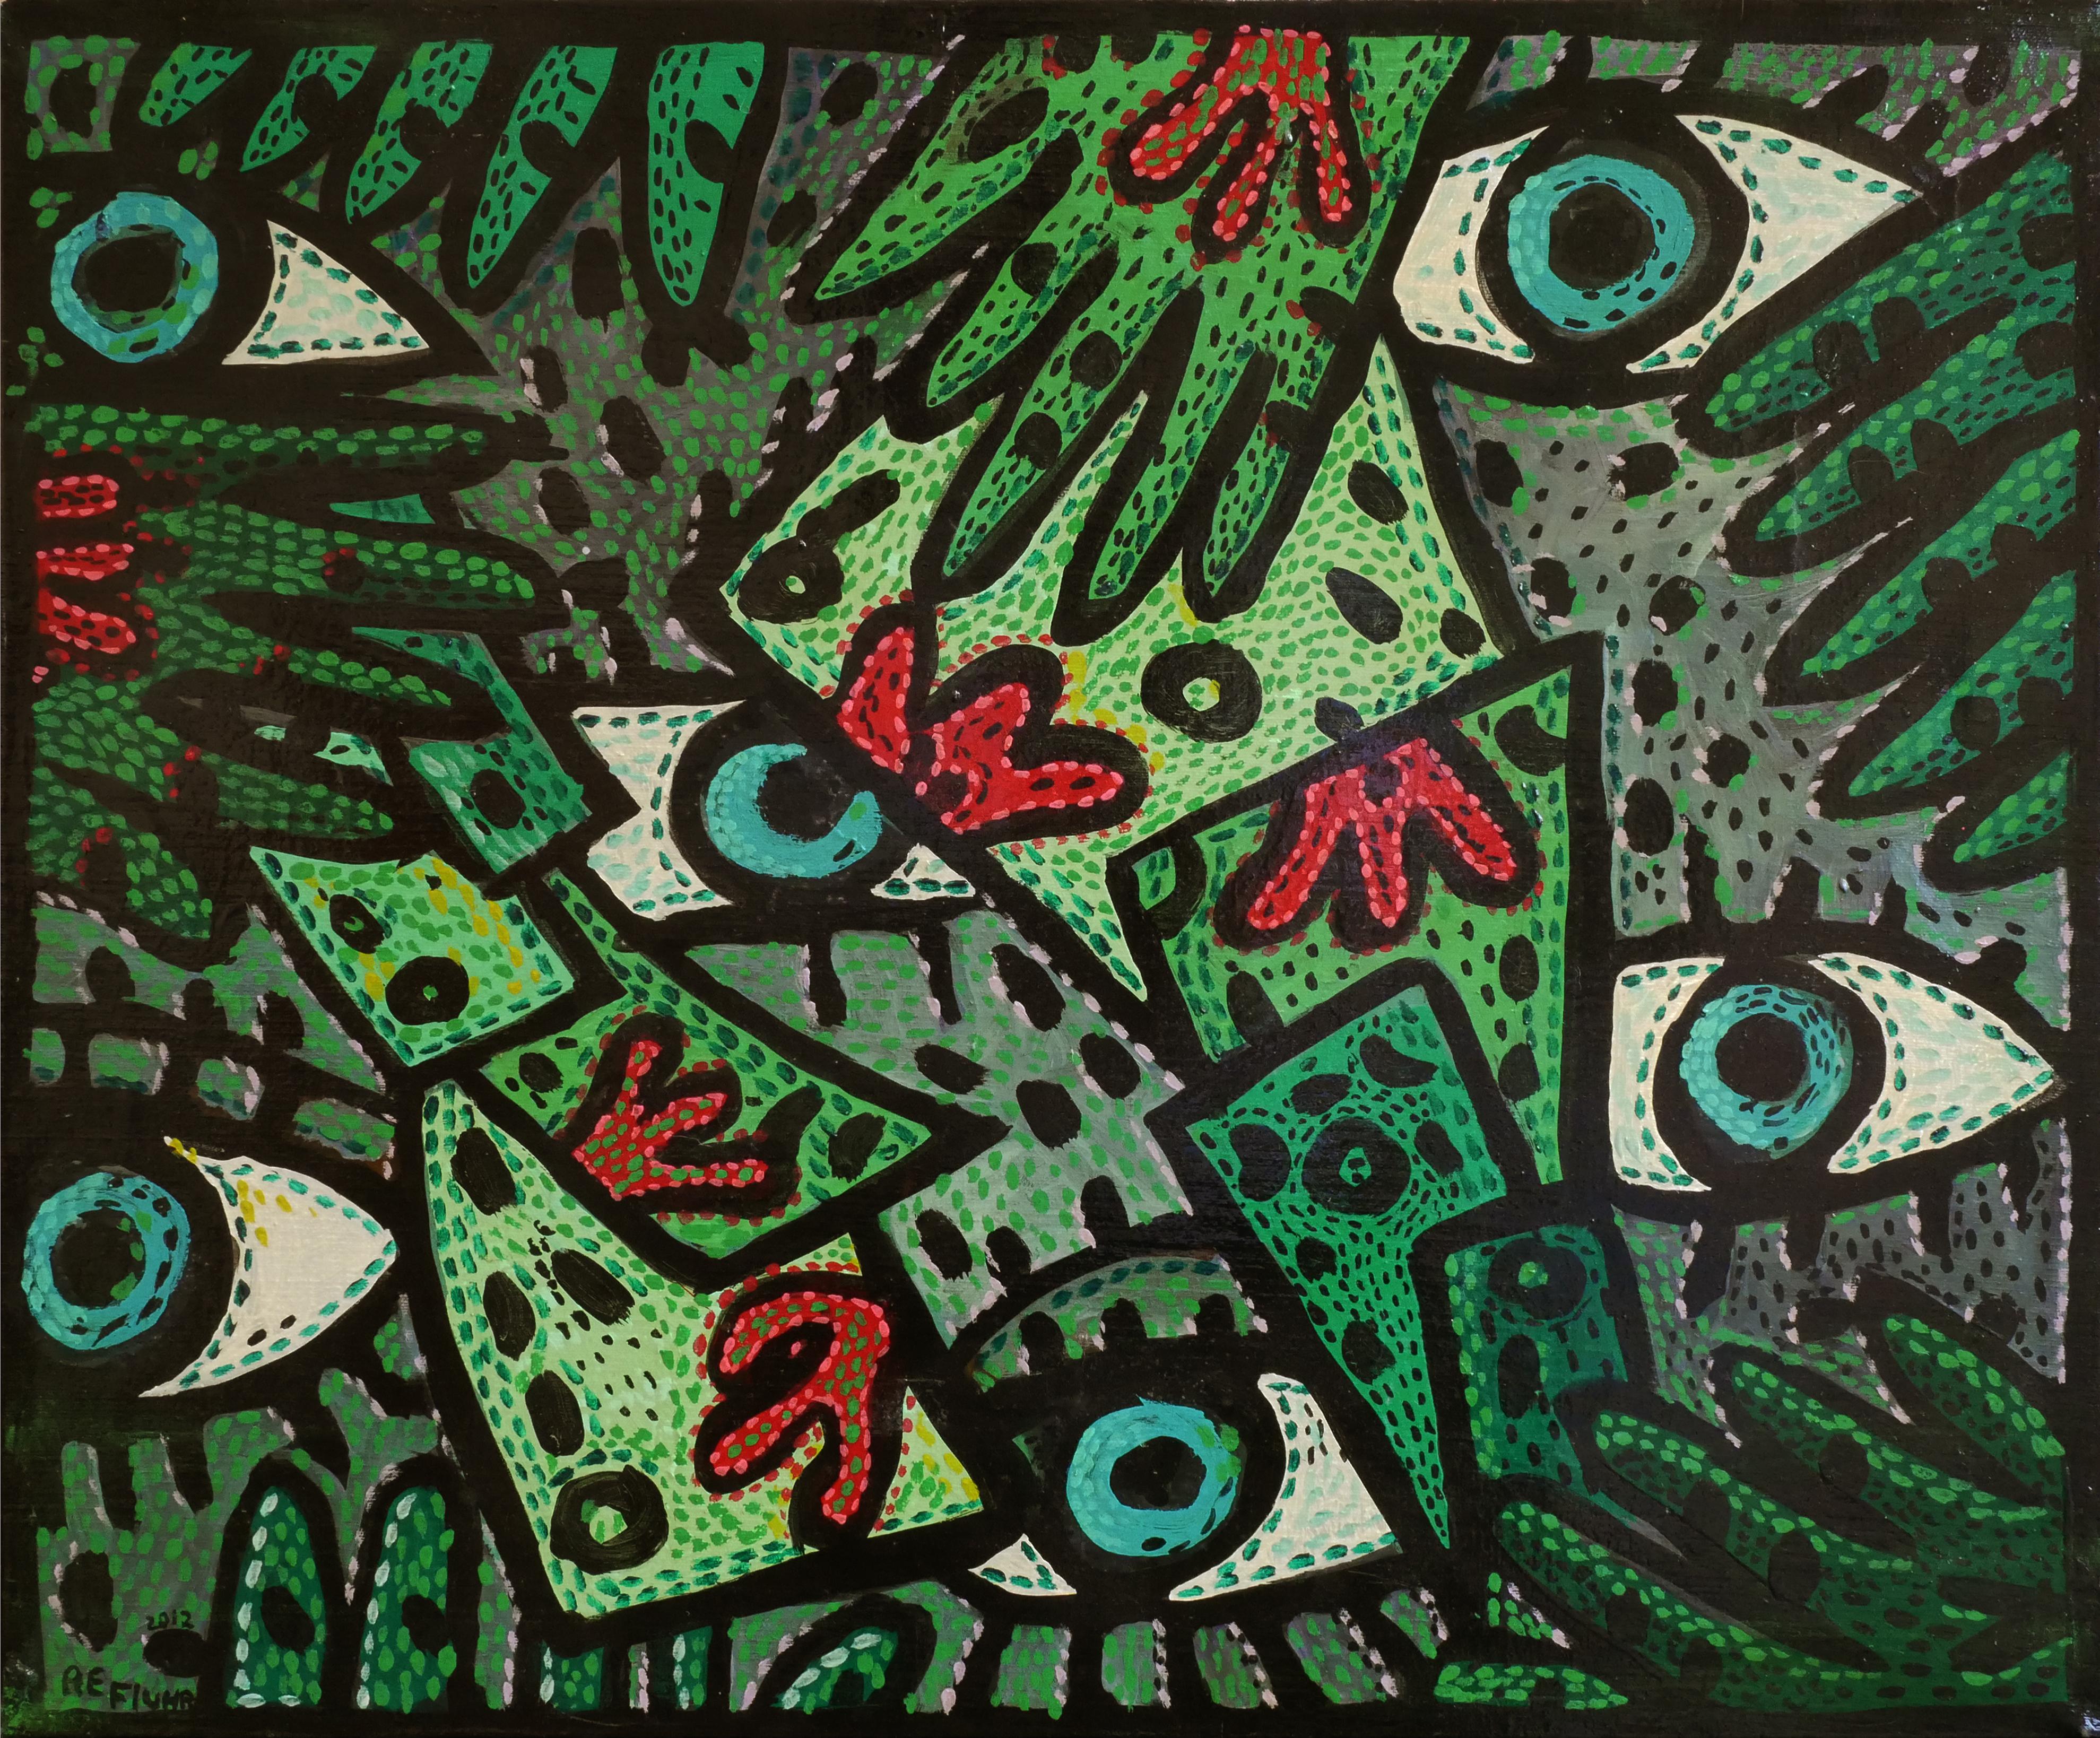 Richard Fluhr Abstract Painting - "Free Money?" Small Fun Green and Red Eyes Abstract Contemporary Painting